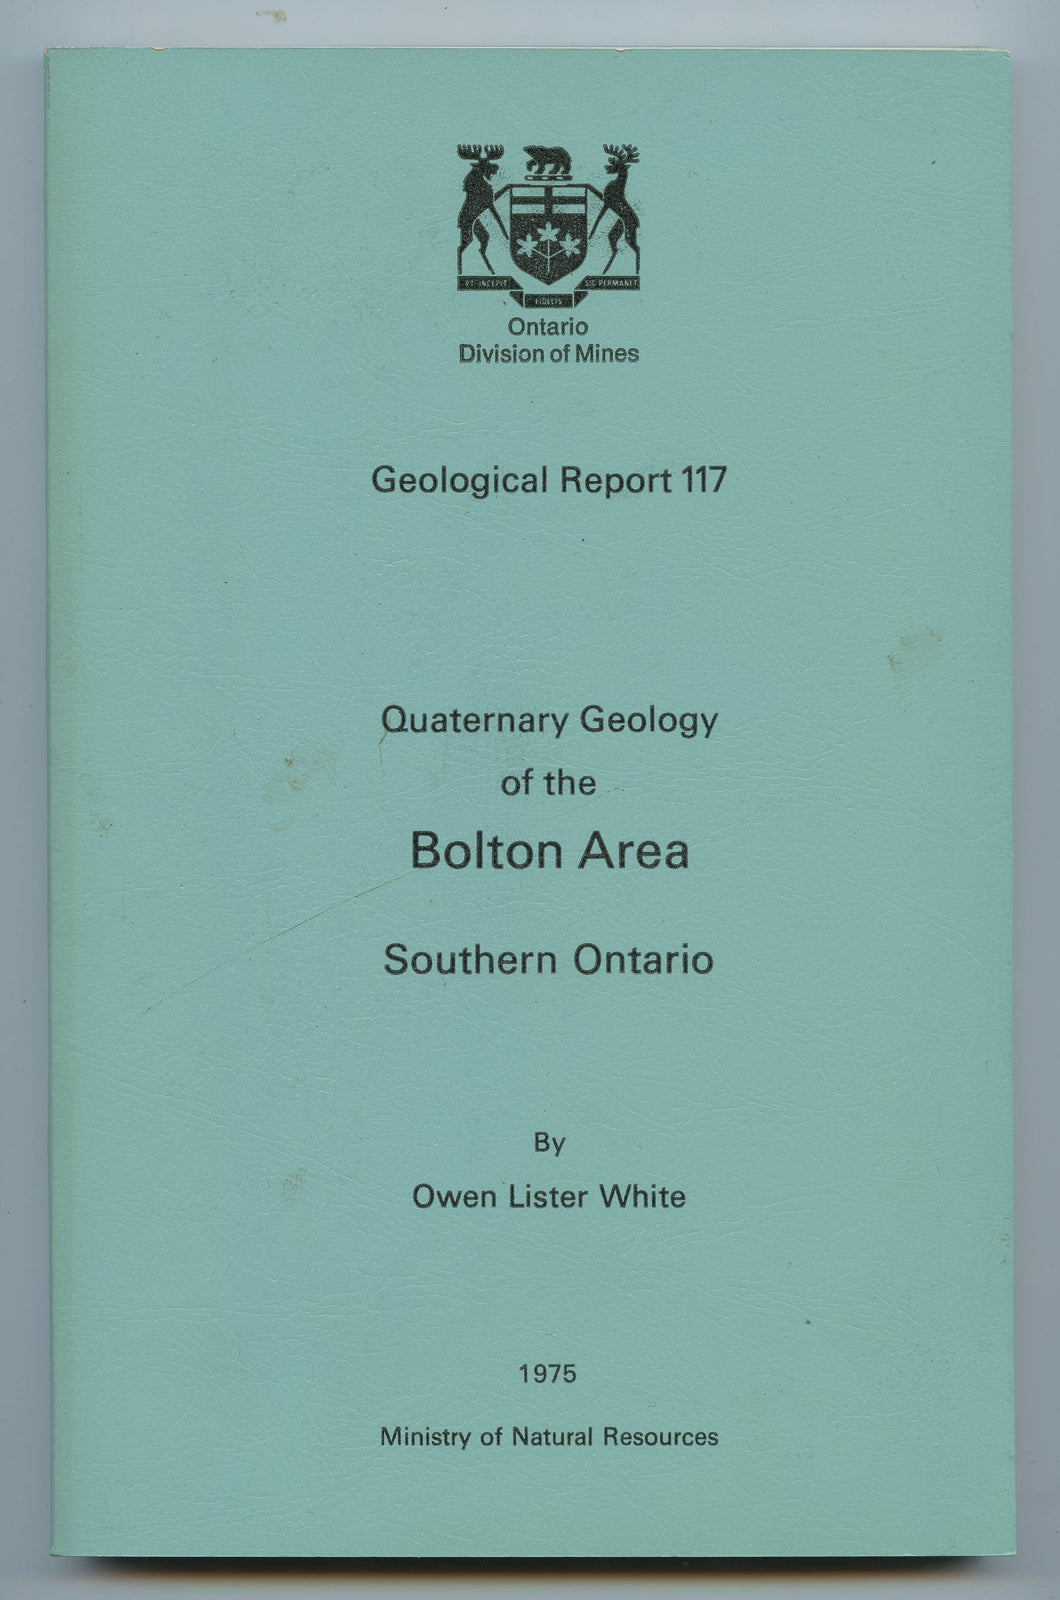 Quaternary Geology of the Bolton Area, Southern Ontario